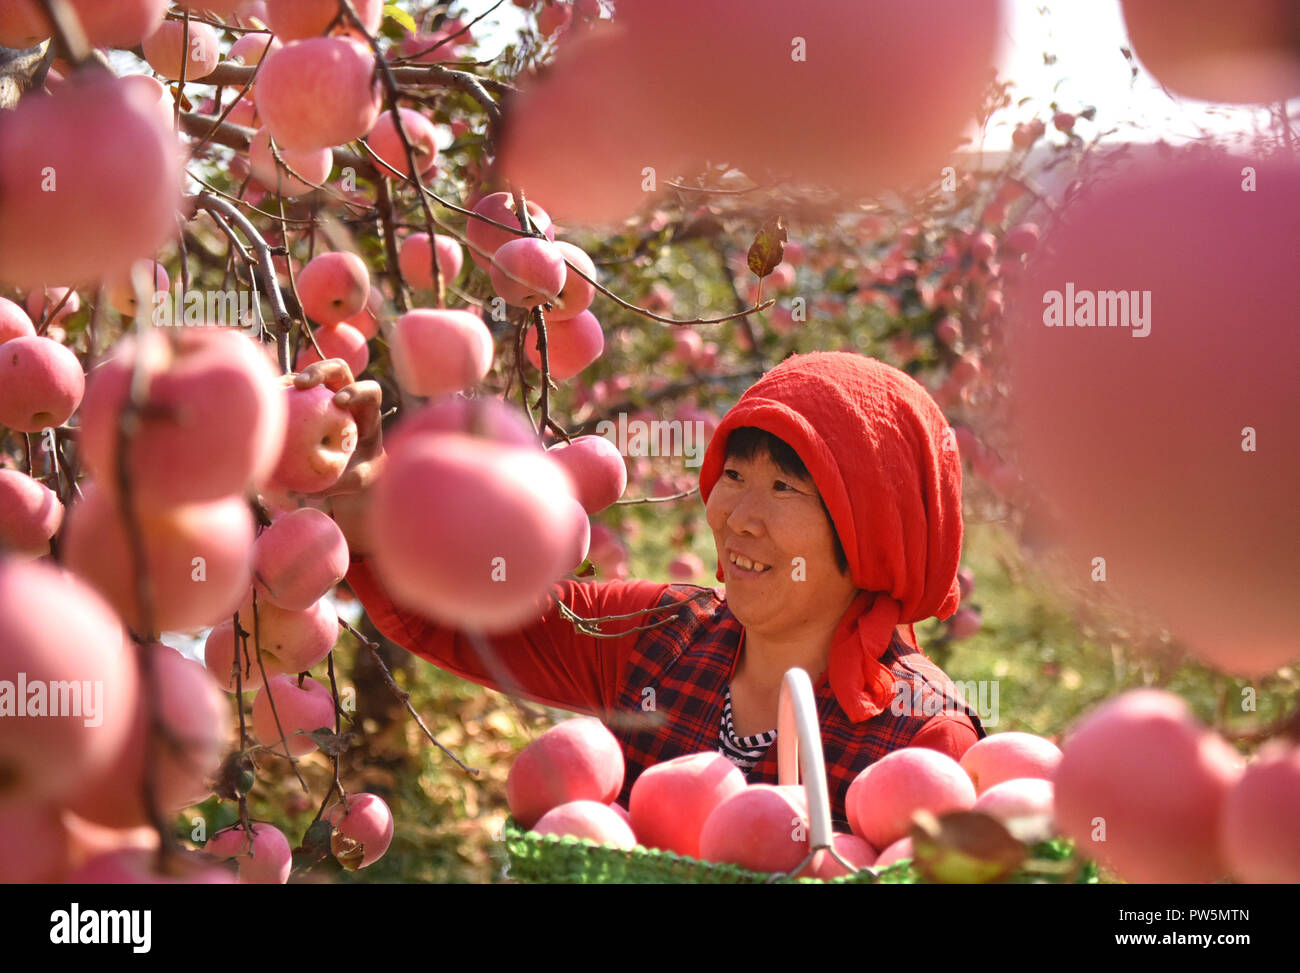 (181012) -- ZIBO, Oct. 12, 2018 (Xinhua) -- A farmer picks apples in an orchard at Houshuibei Village in Yiyuan County, east China's Shandong Province, on Oct. 12, 2018.  (Xinhua/Zhao Dongshan) (sxk) Stock Photo